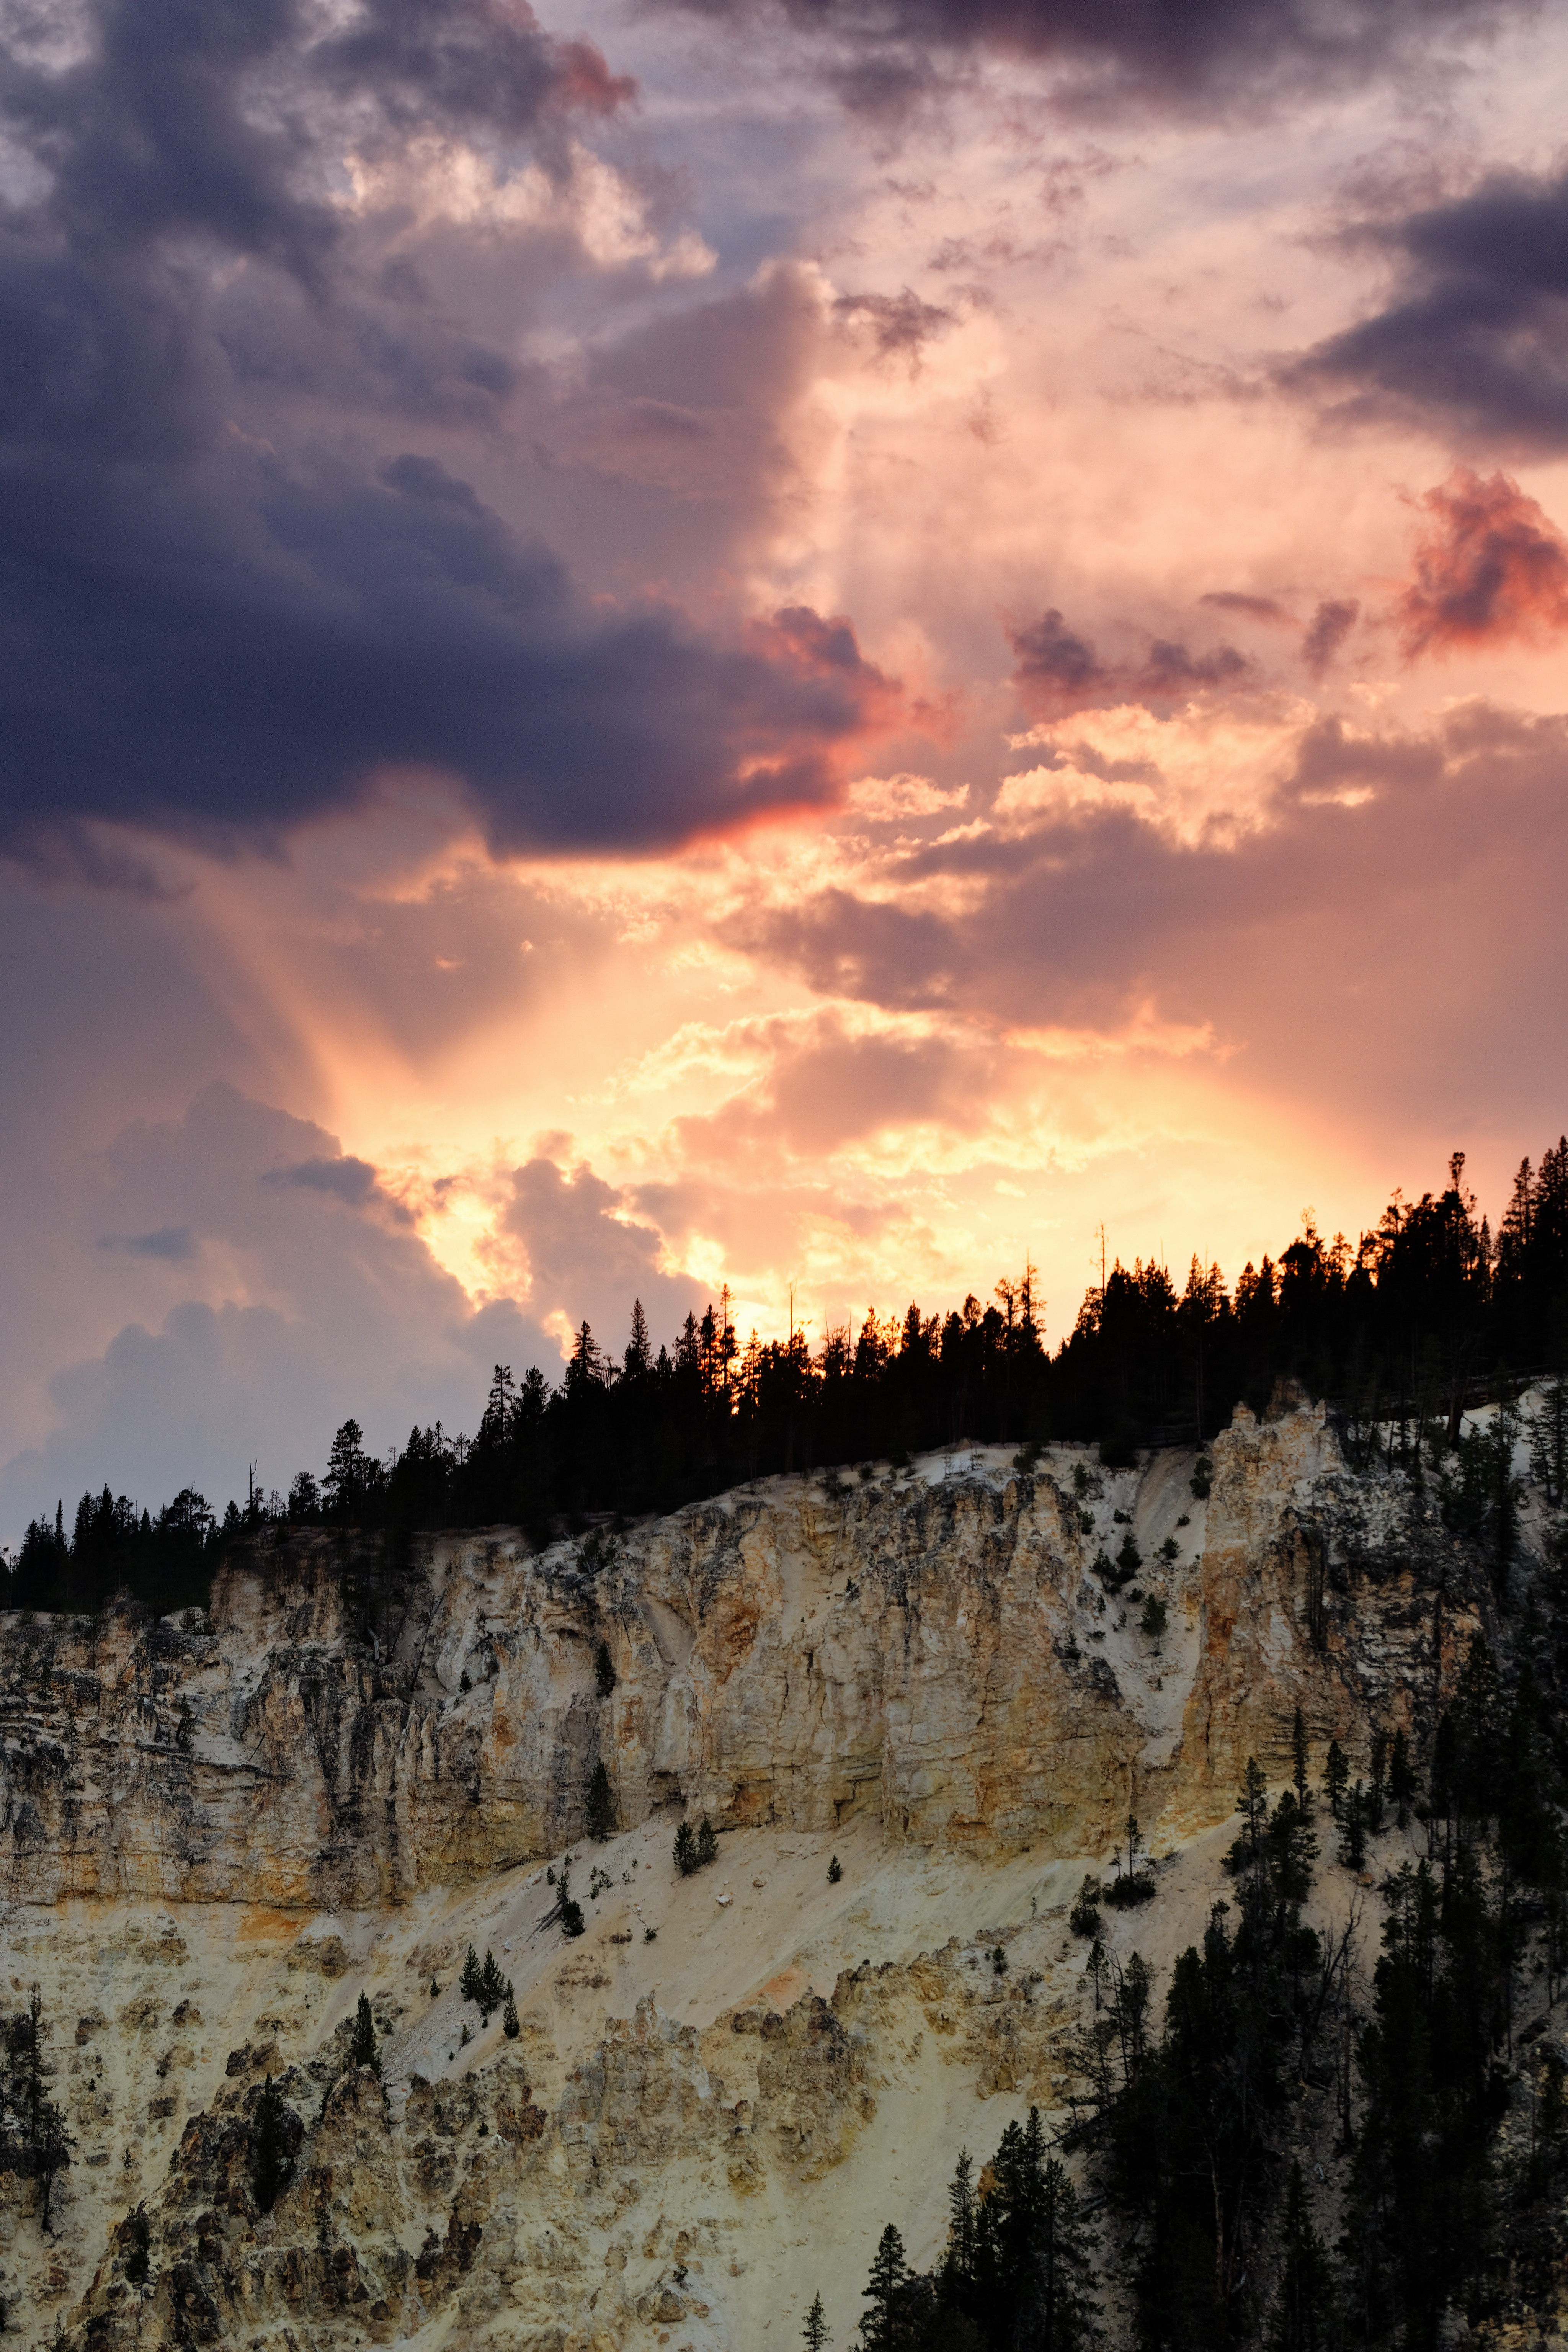 rocks, nature, trees, sunset, clouds, slope